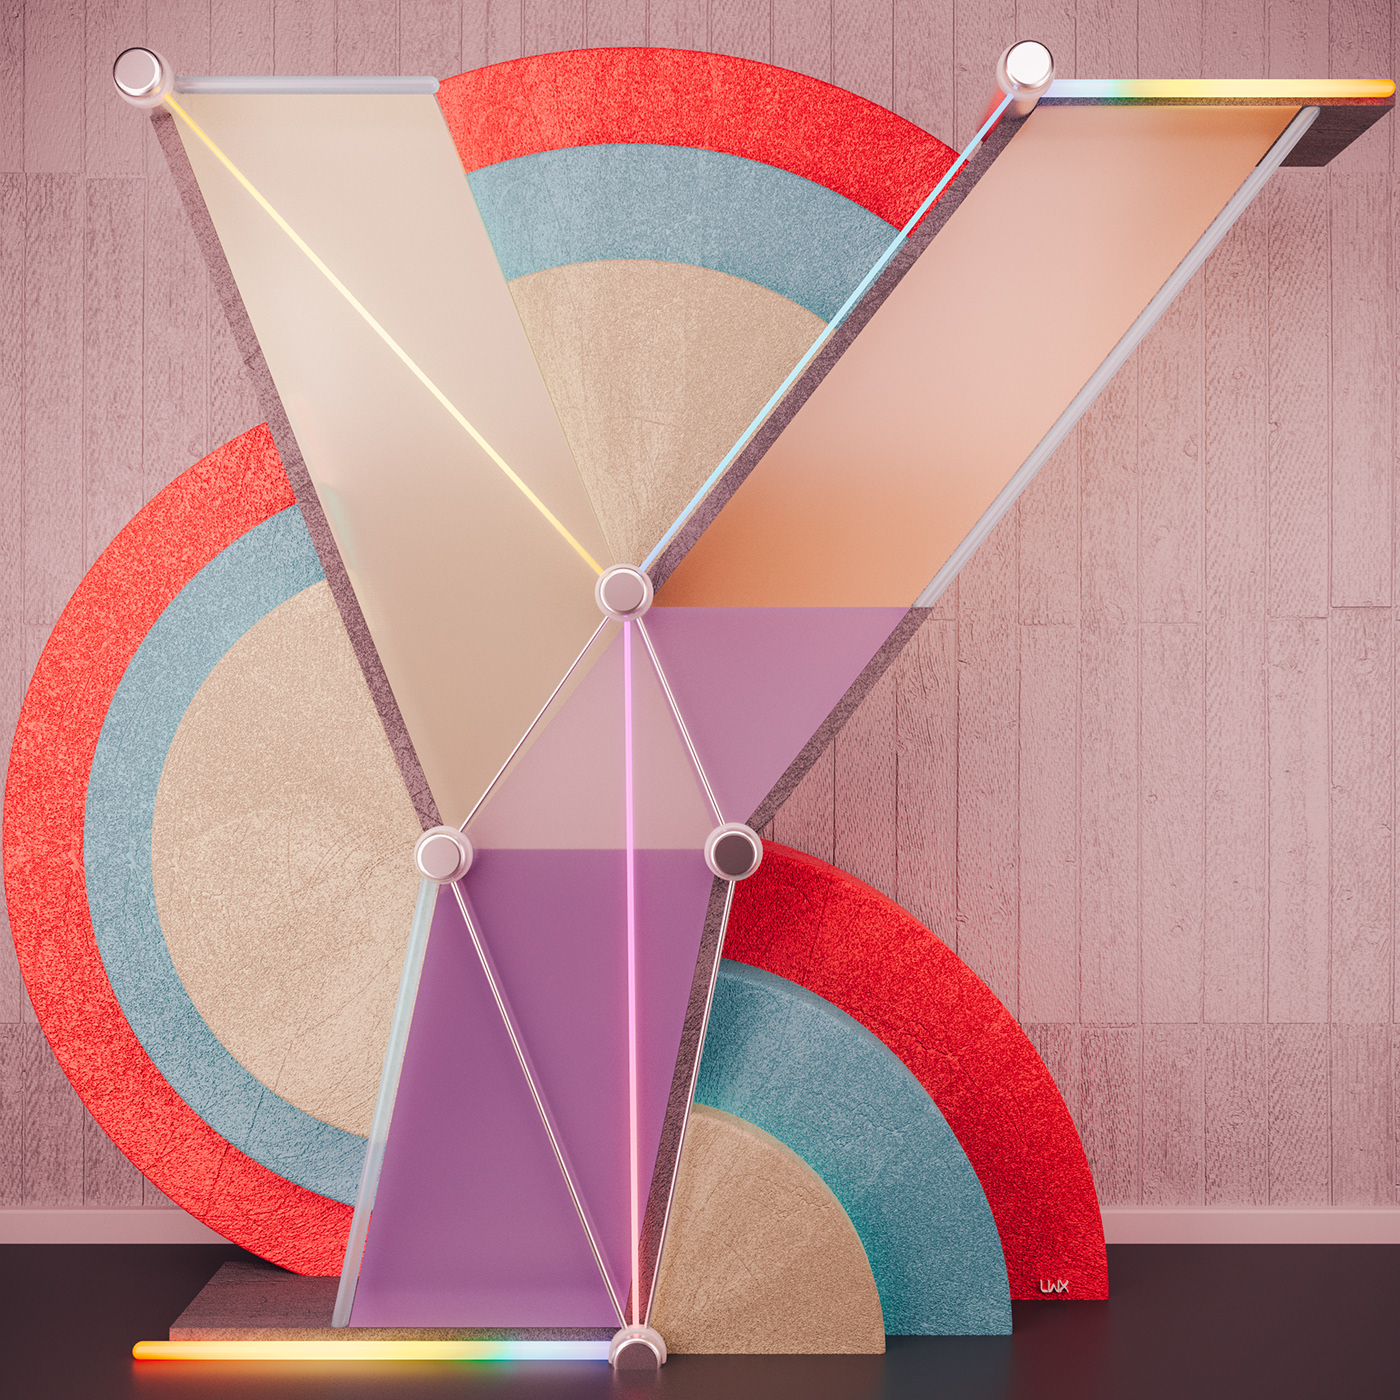 3DType letters geometry lights glass Modernart Playful characters 36daysoftype 36daysoftype05